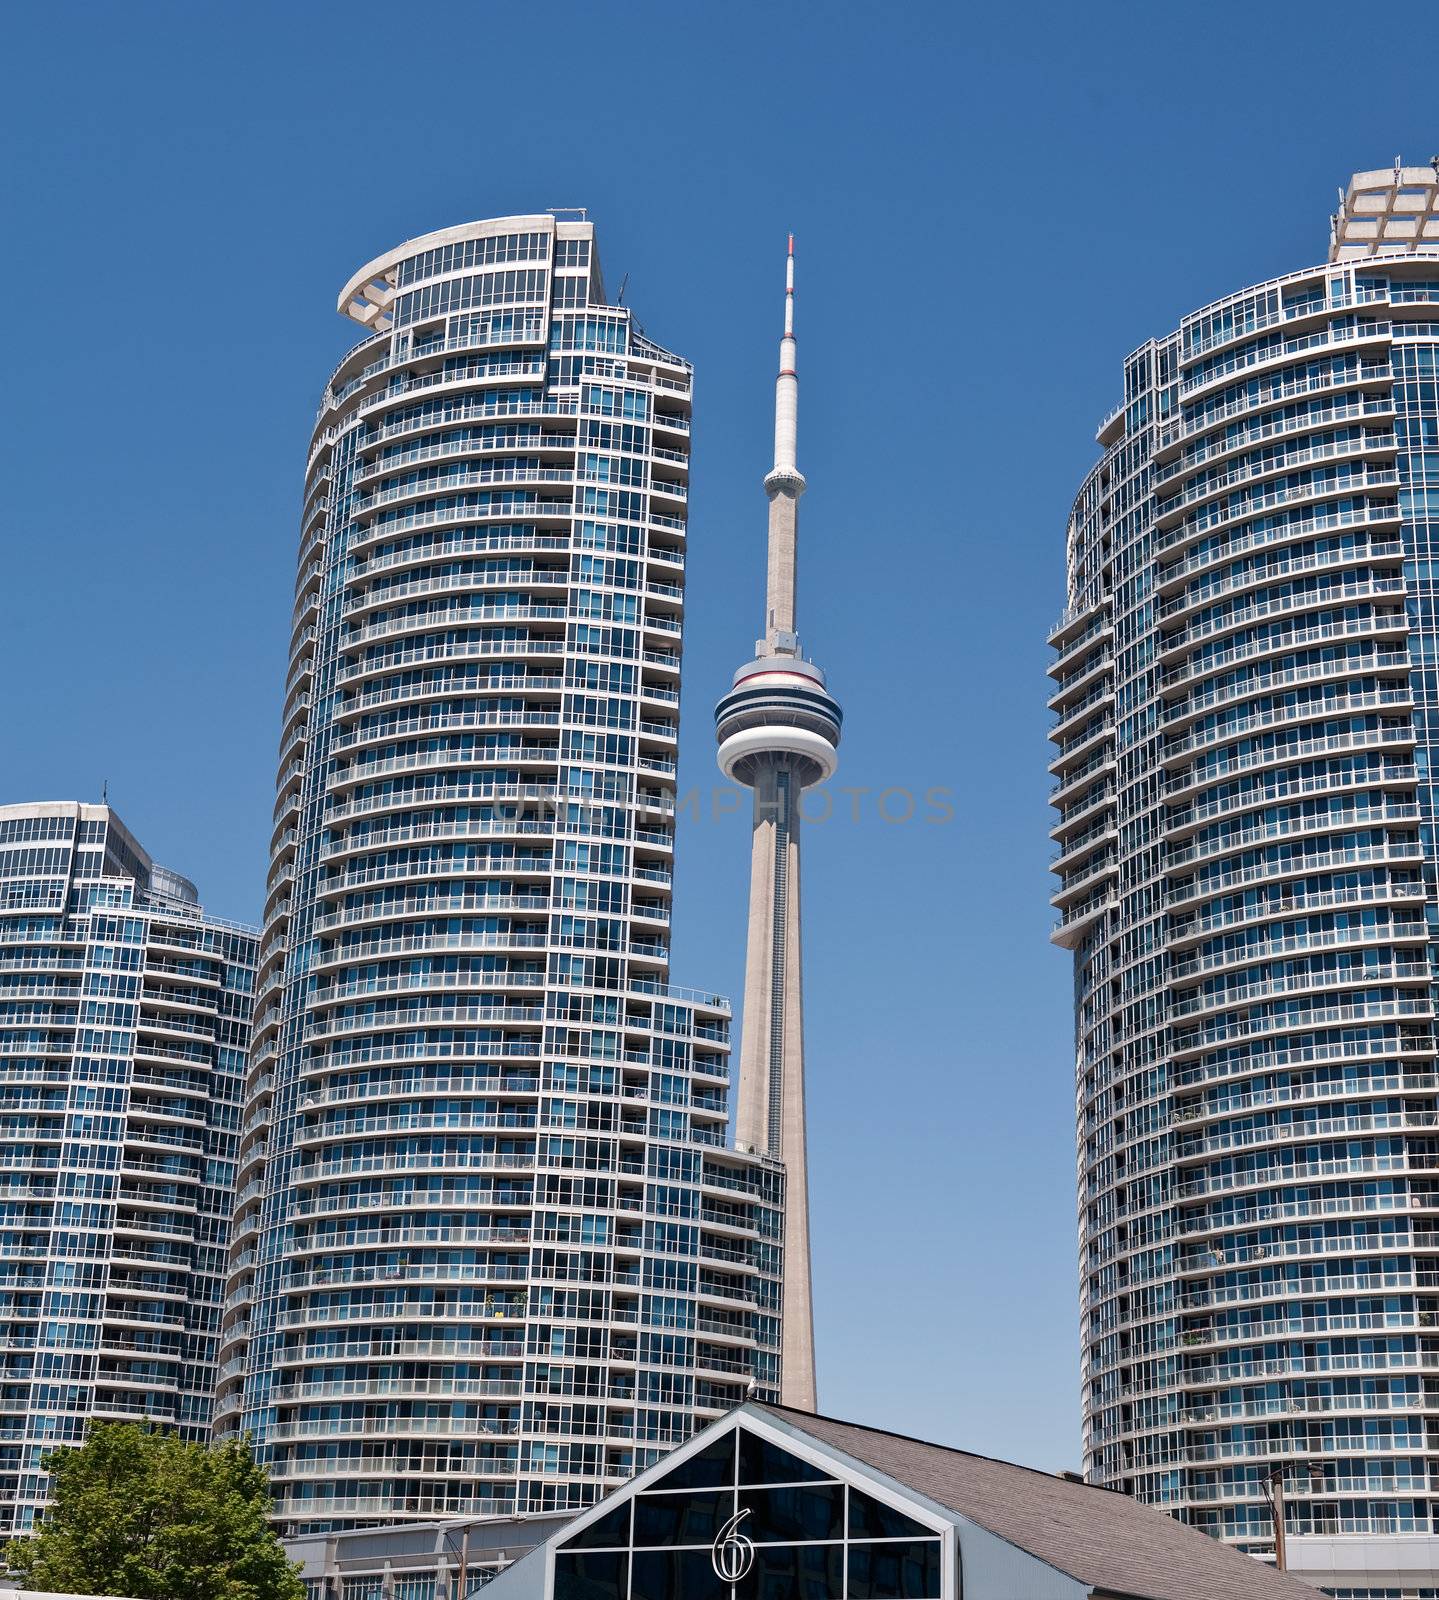 View on CN tower and modern residential buildings in downtown Toronto